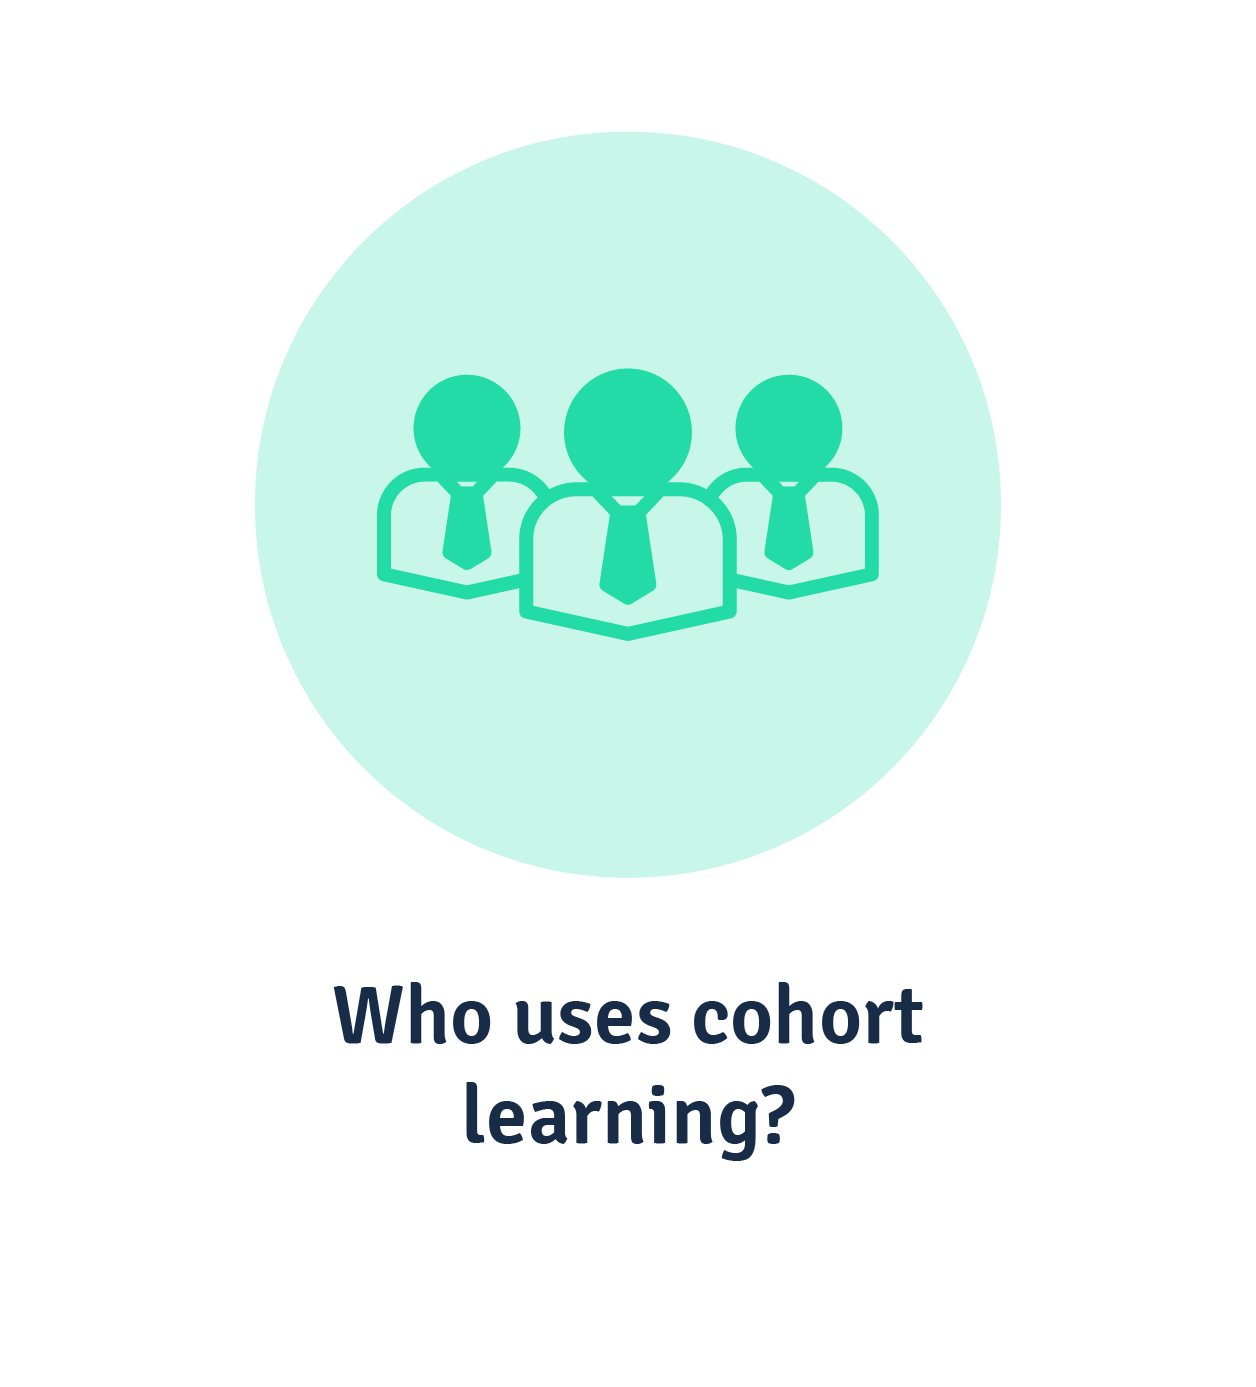 Who uses cohort learning?